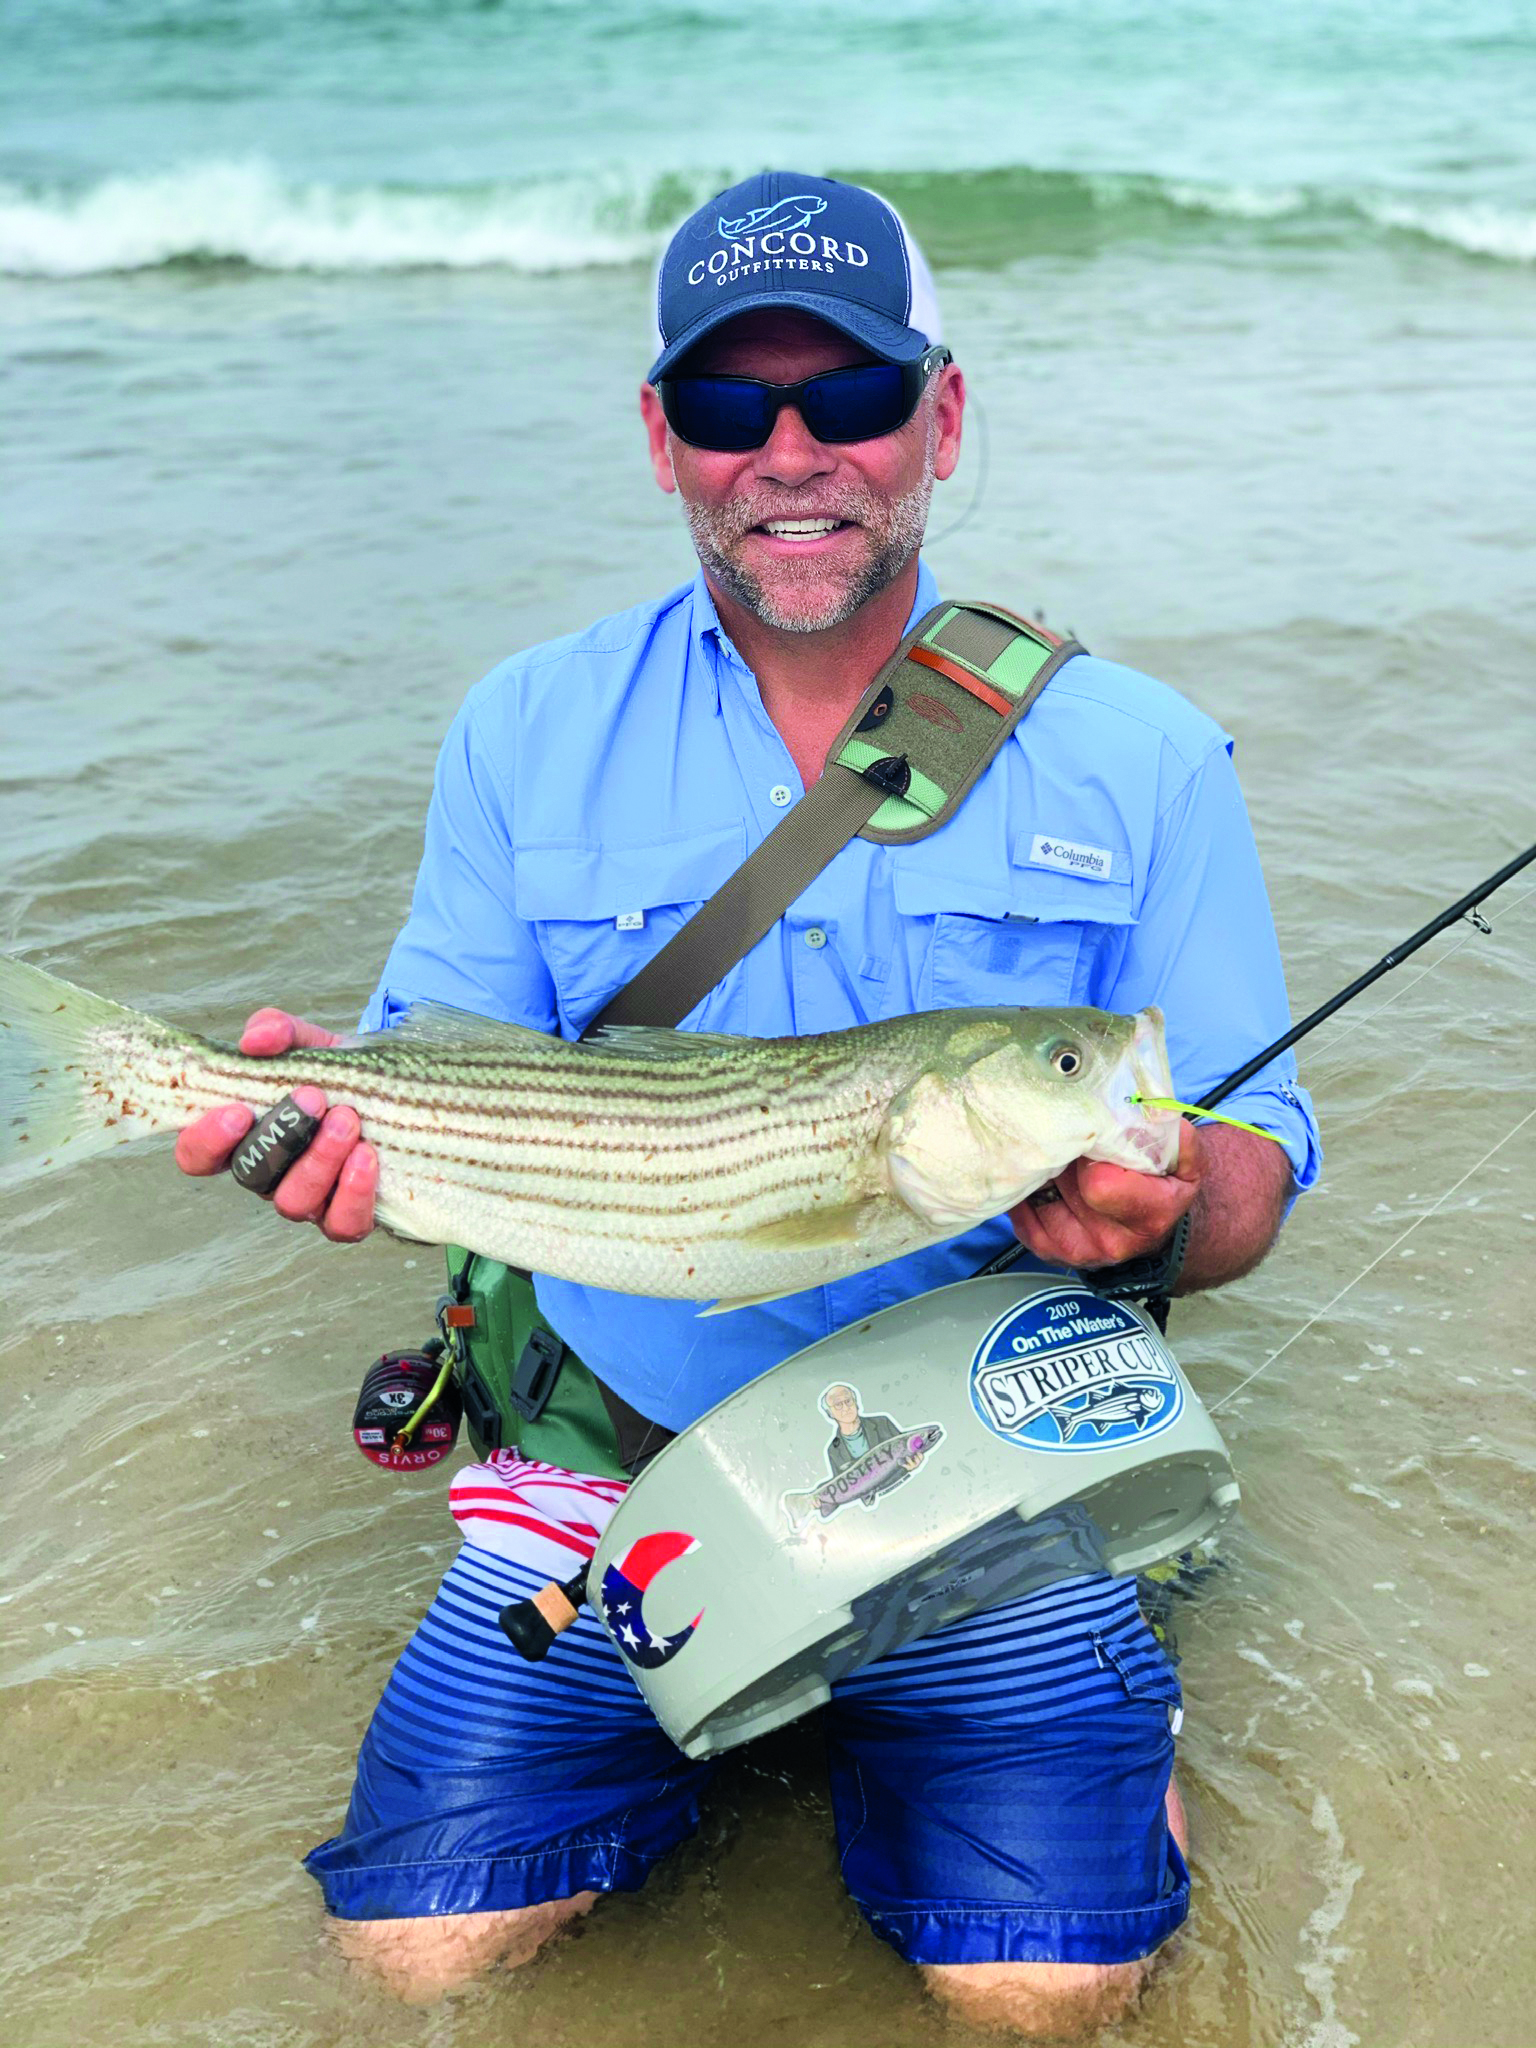 Using Two handed Rods For Striped Bass: By Daniel Wells – Thomas & Thomas